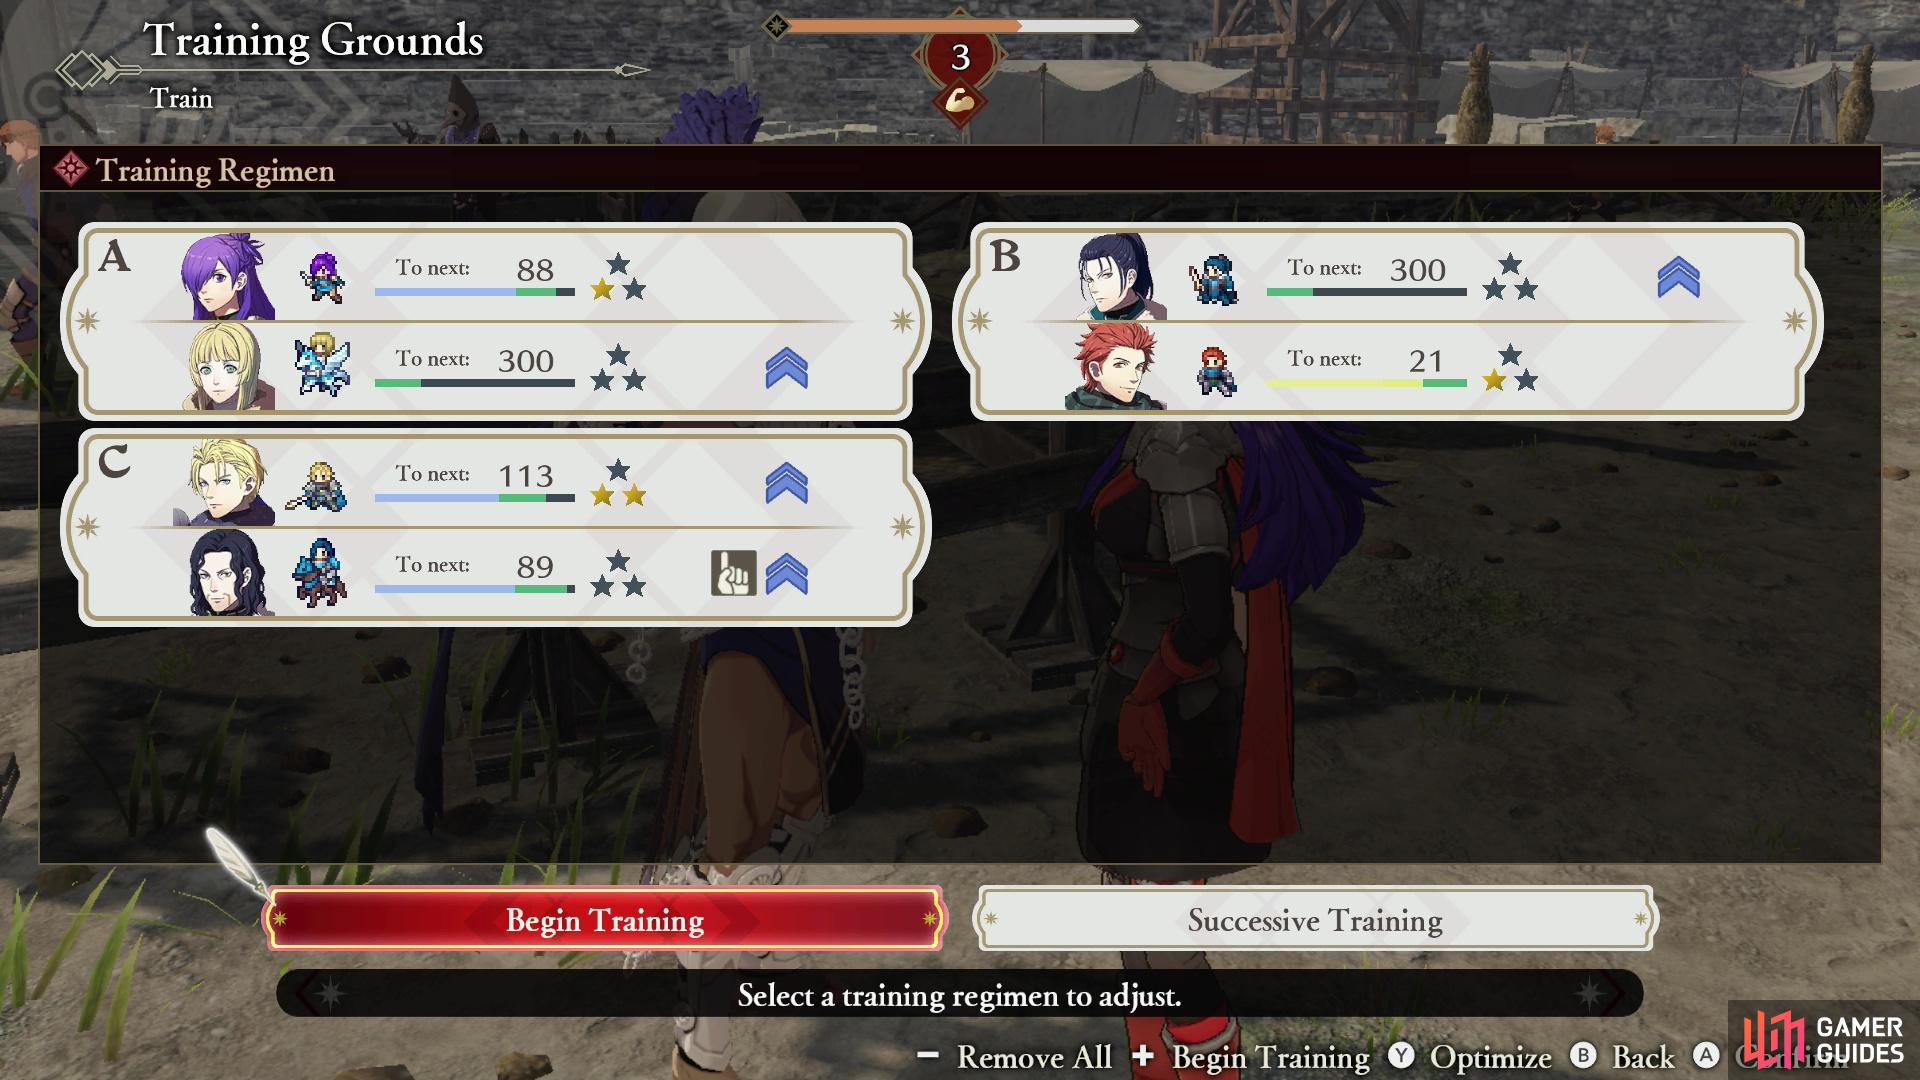 You can Train characters at the Training Grounds, increasing their class levels and Support Ranks.